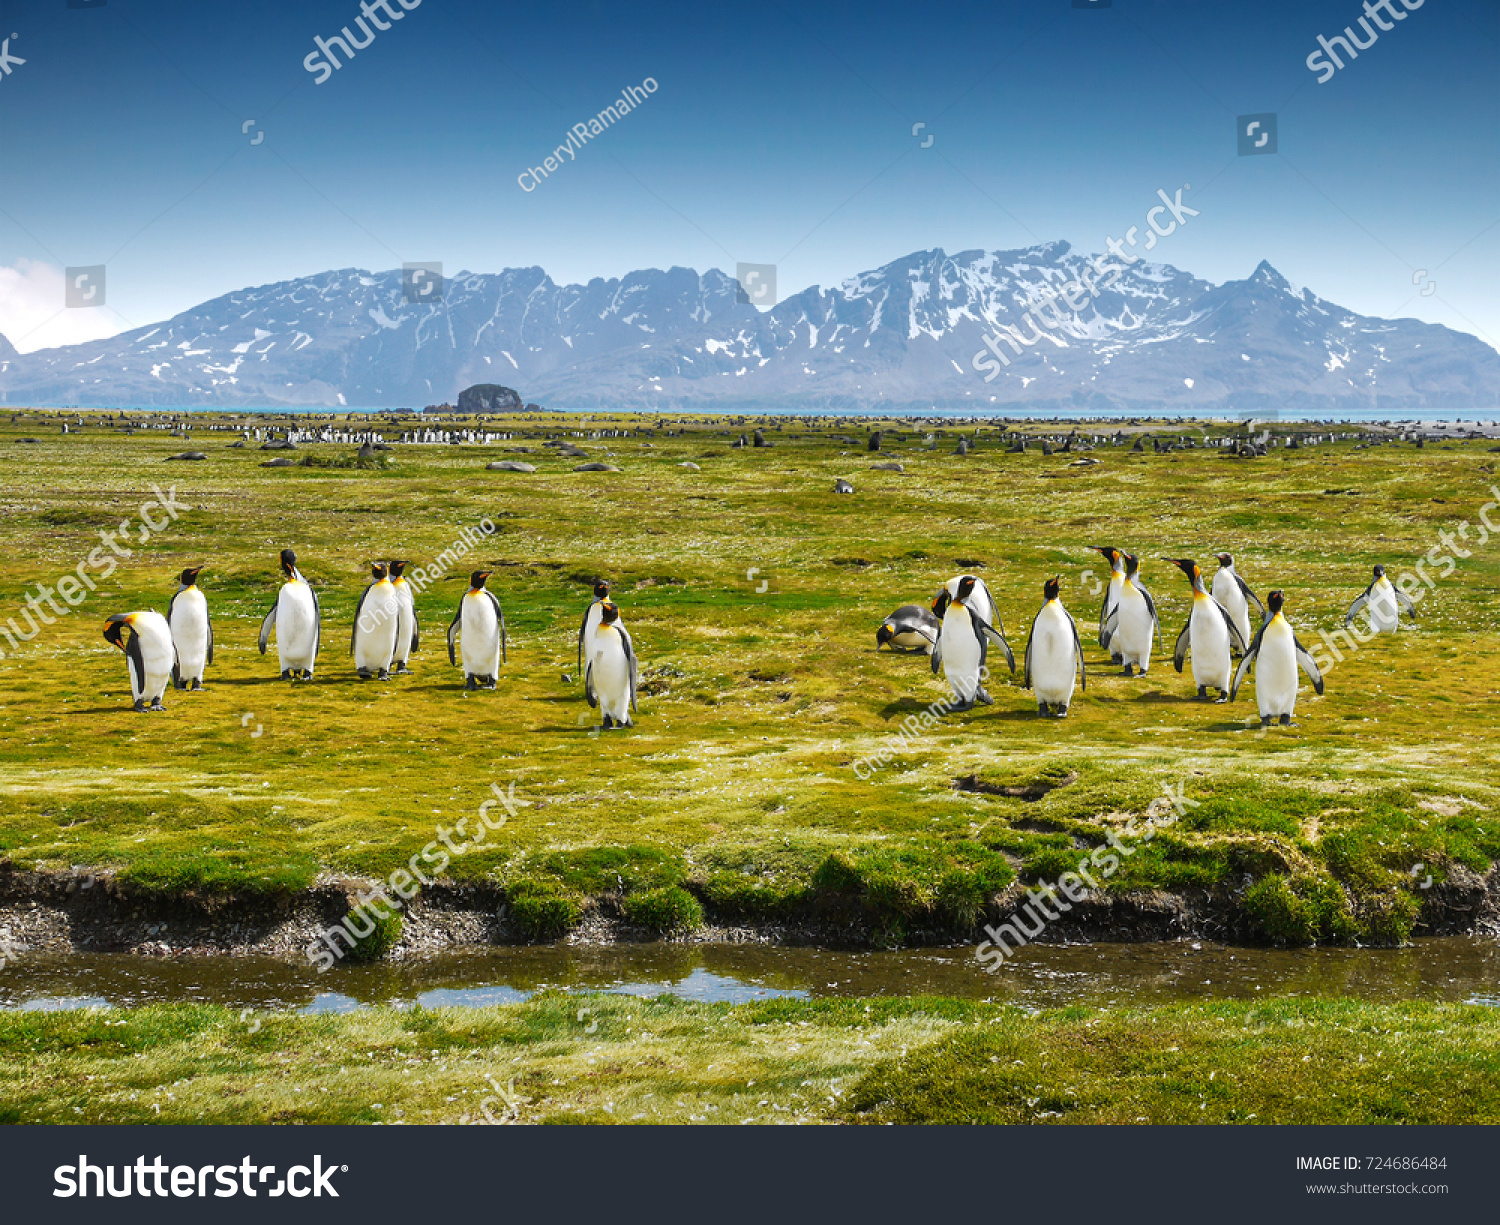 Wide view of South Georgia Island landscape and nature with a group of king penguins walking and preening on the green grasses and lichens of Fortuna Bay, snow-capped mountains in the background. #724686484